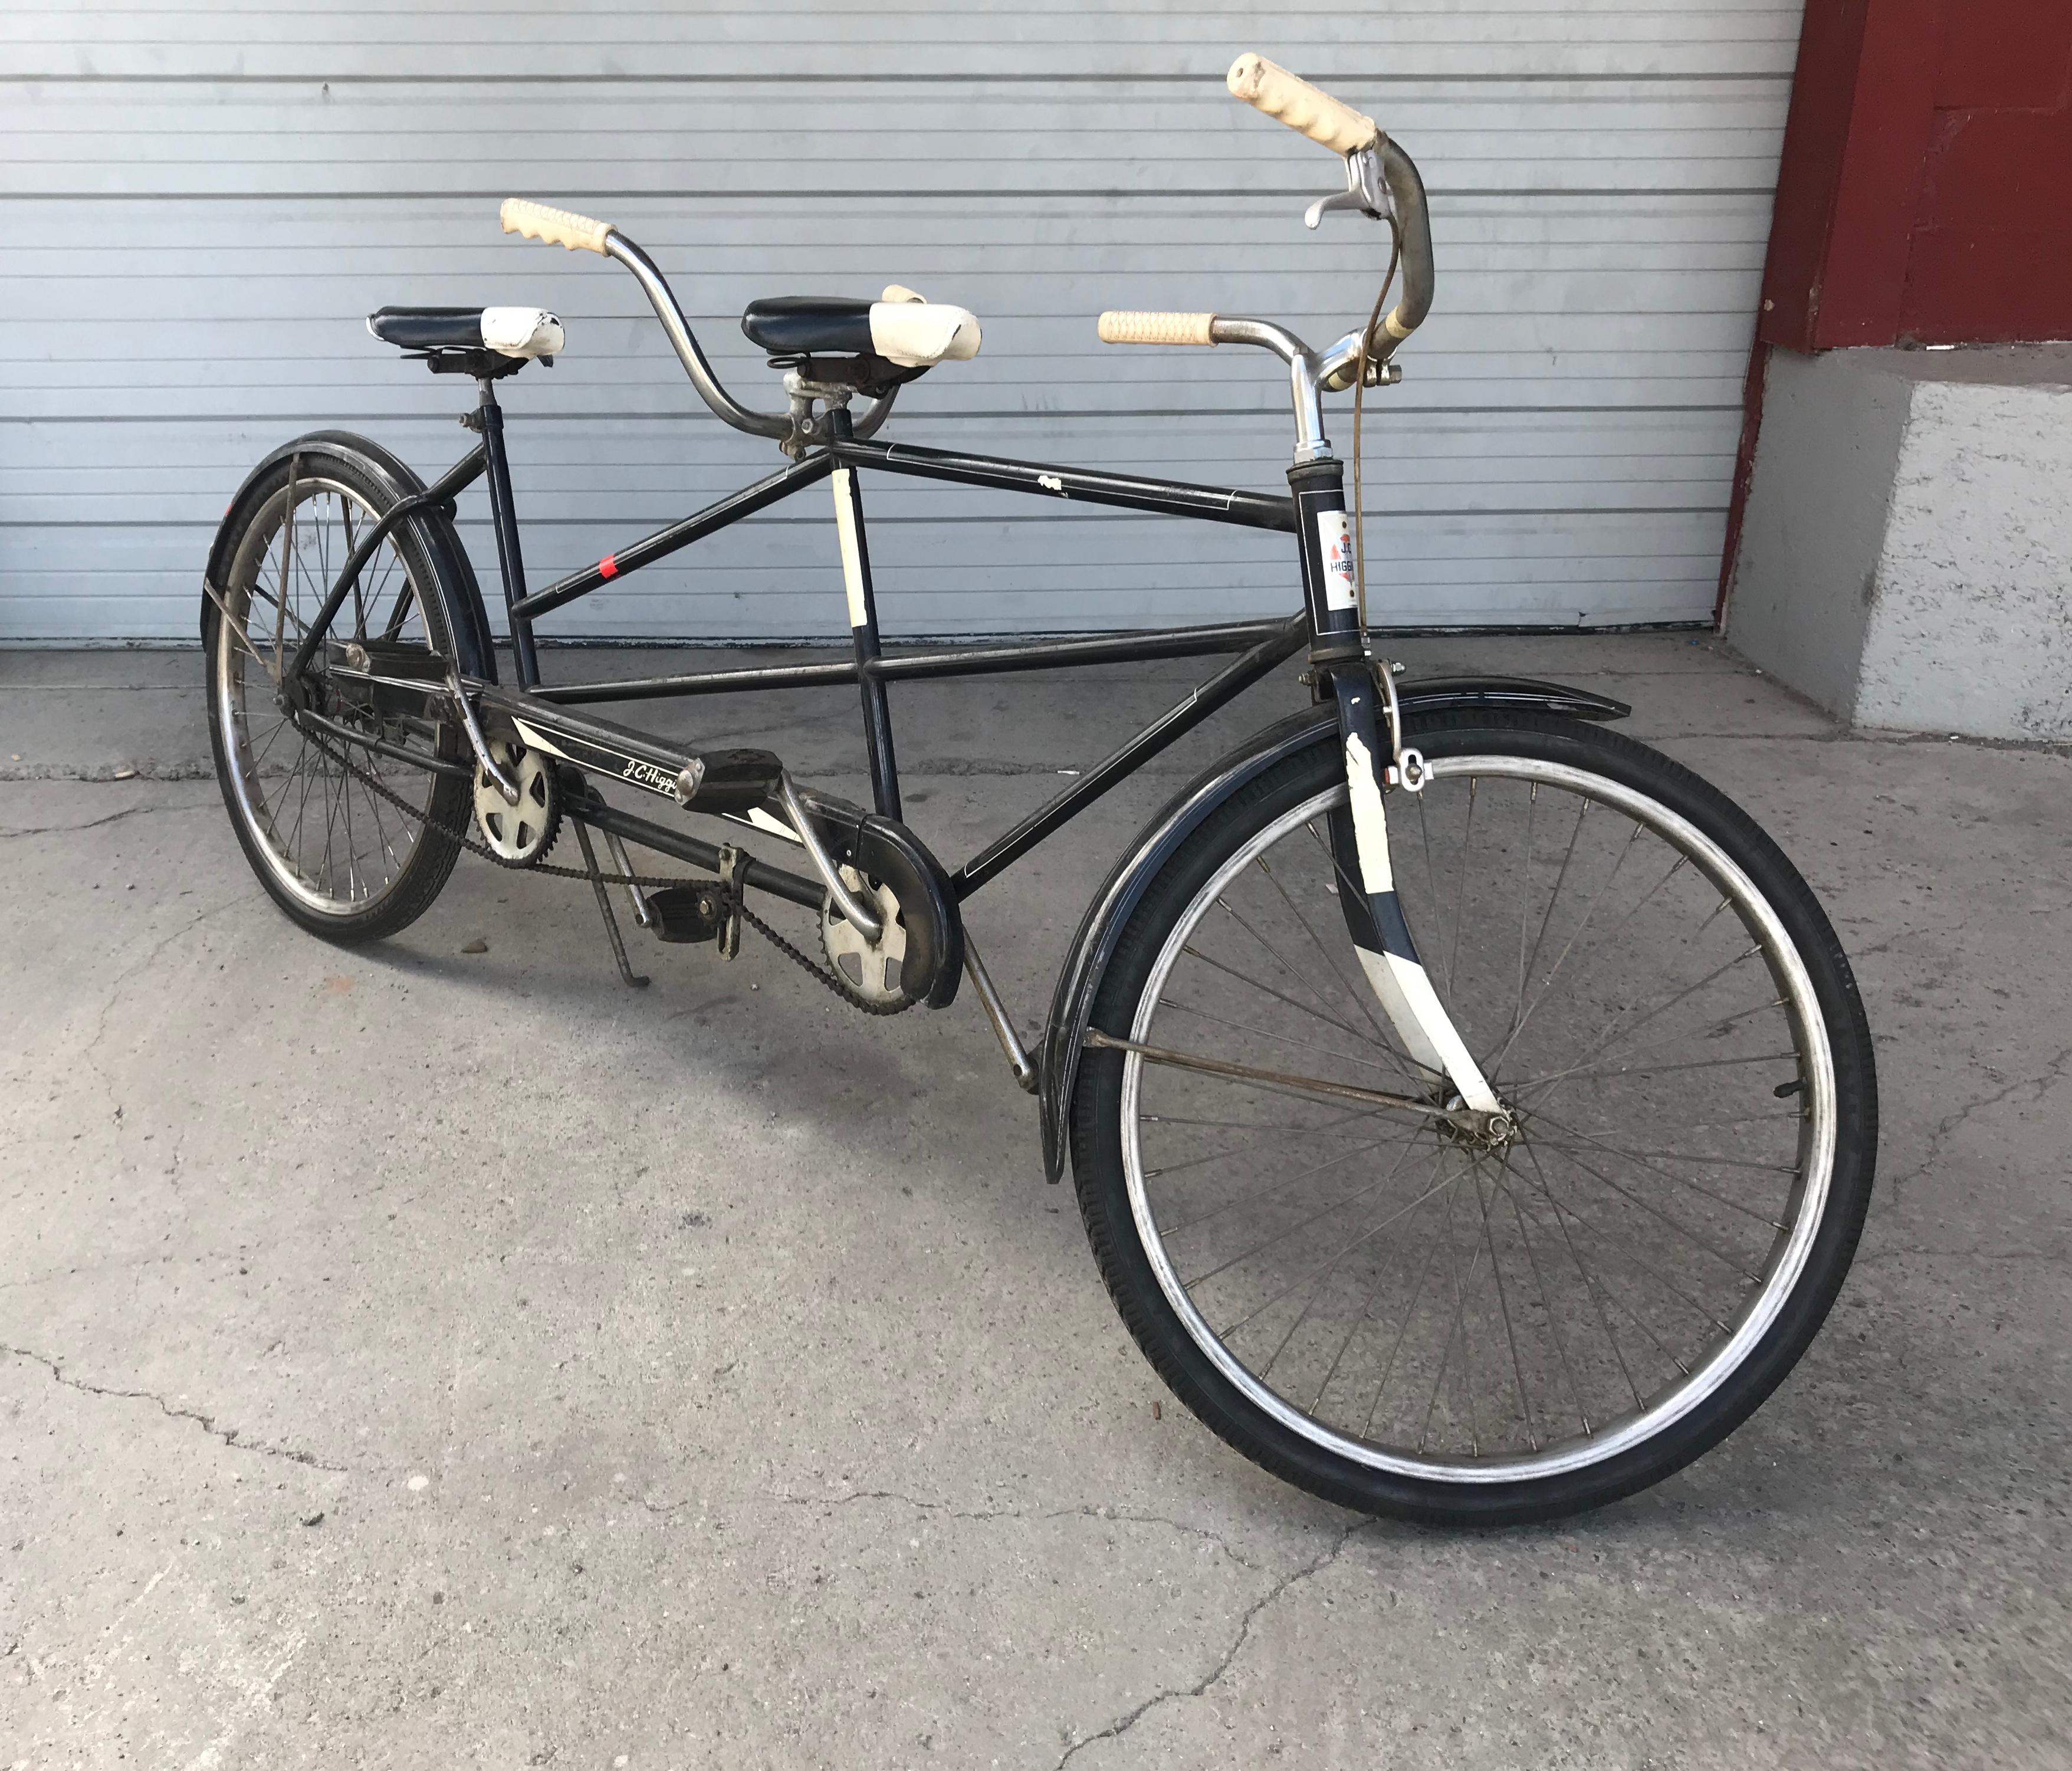 Classic 1950s Tandem bike, bicycle built for two by J C Higgins Schwinn. Retains all original parts grips pedels tires seats etc. Amazing original condition Original color paint and finish Unrestored, ready to ride. Hand delivery avail to New York